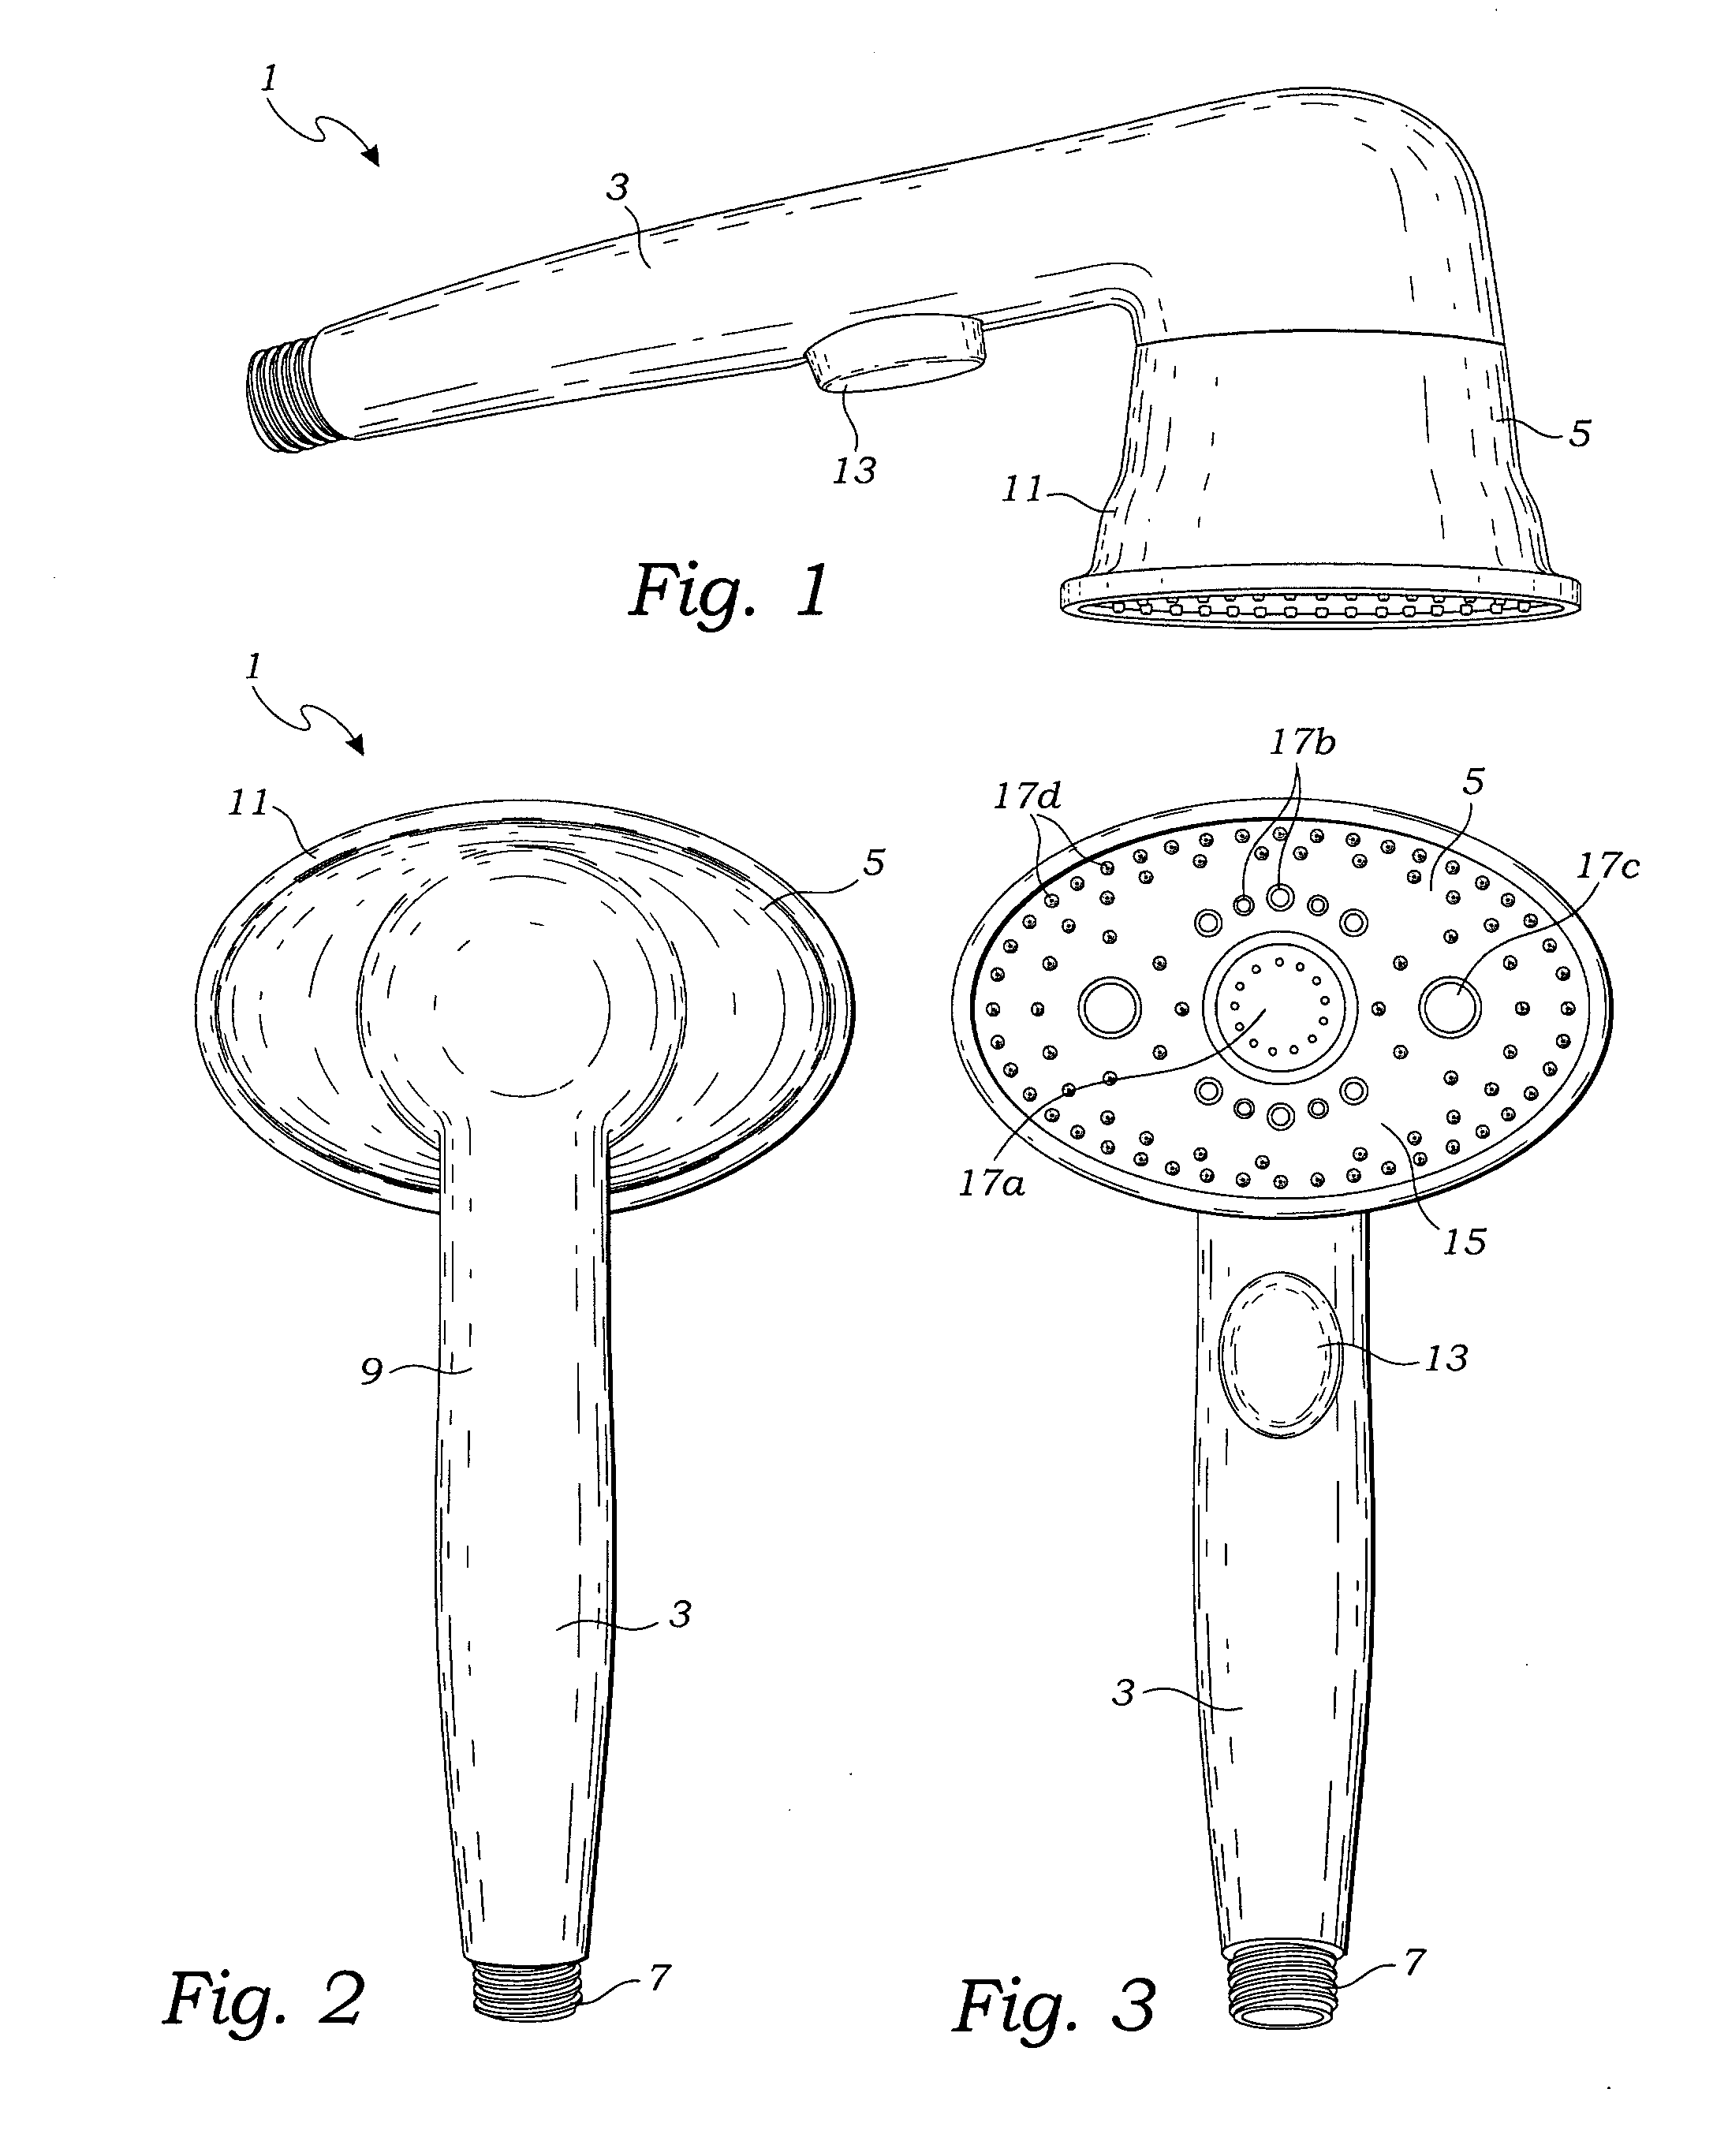 Showerhead with rotatable oval spray pattern and handheld spray pattern controller